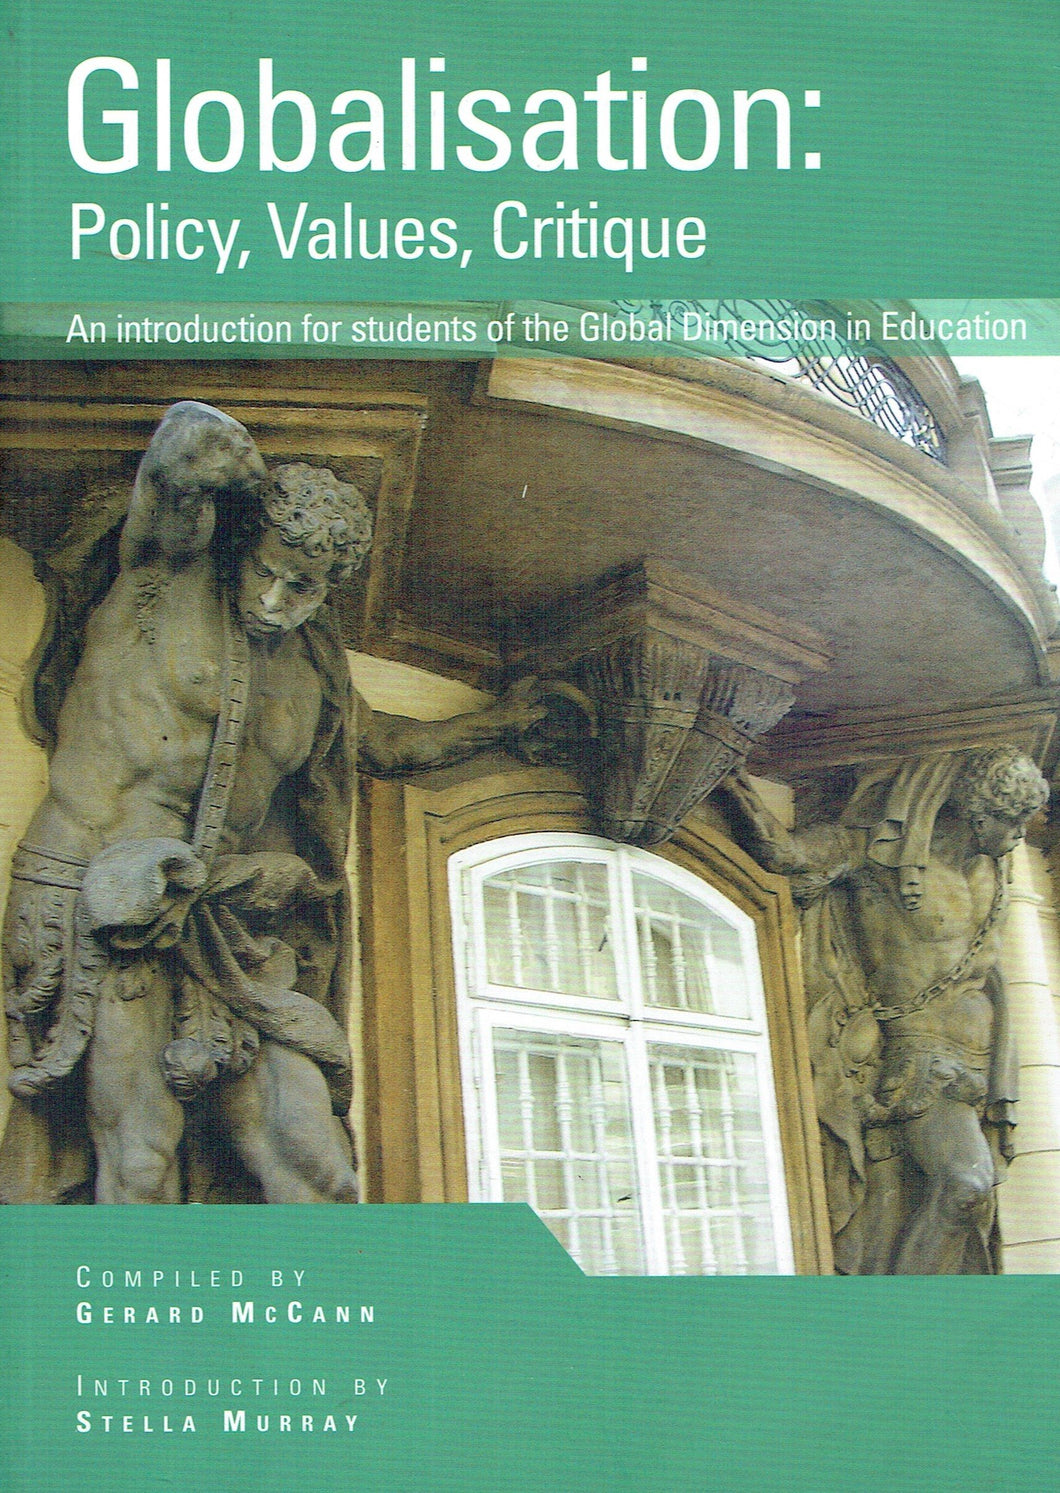 Globalisation: Policy, Values, Critique: An Introduction for Students of the Global Dimension in Education